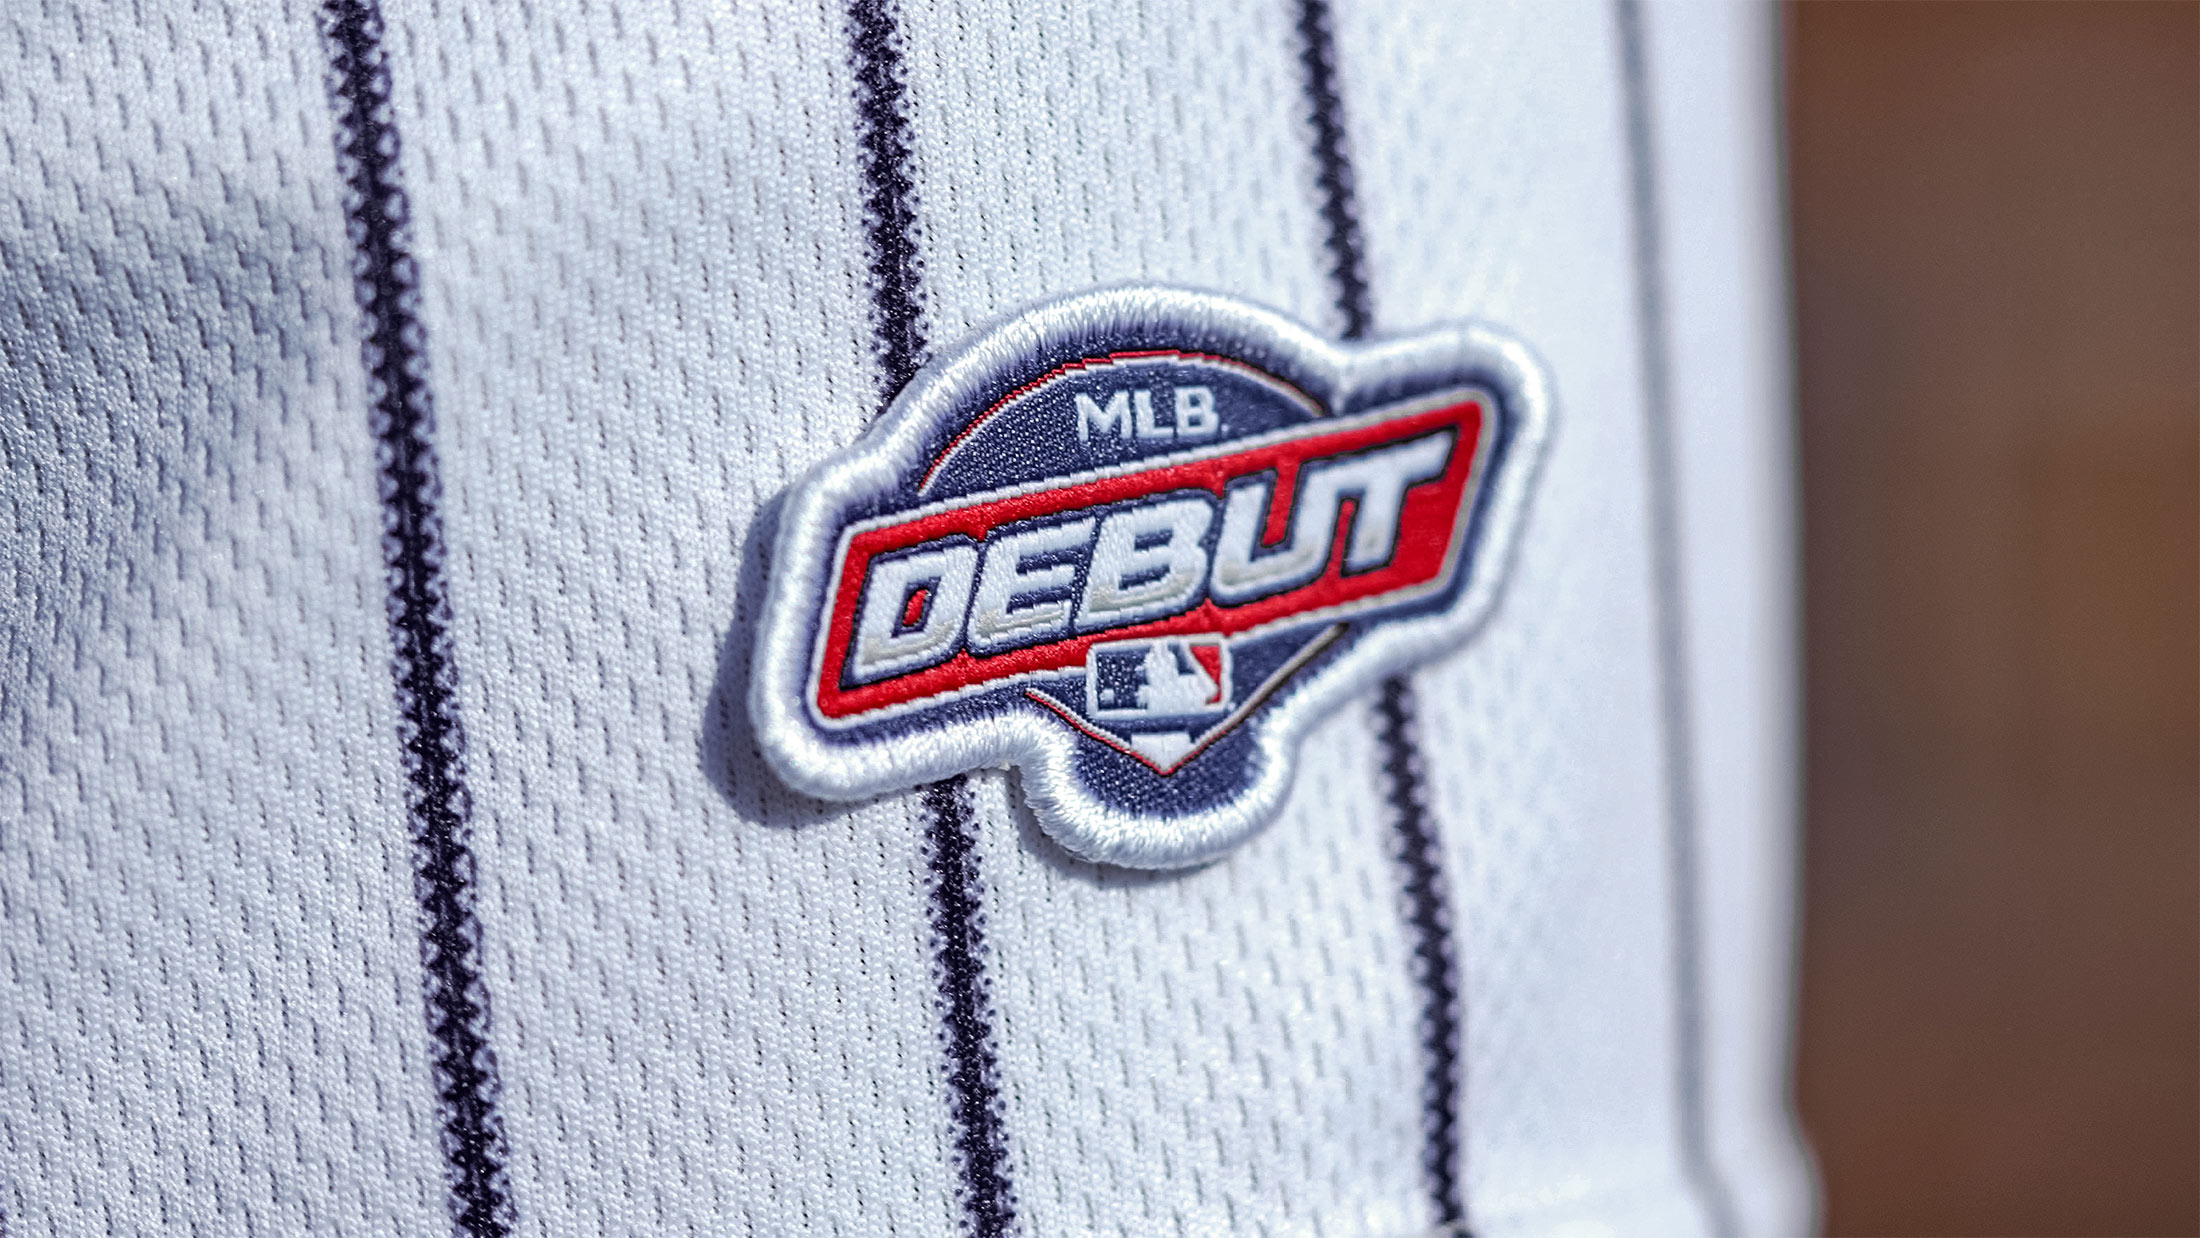 MLB Rookies to Wear Debut Patches Bound for Collectibles Market